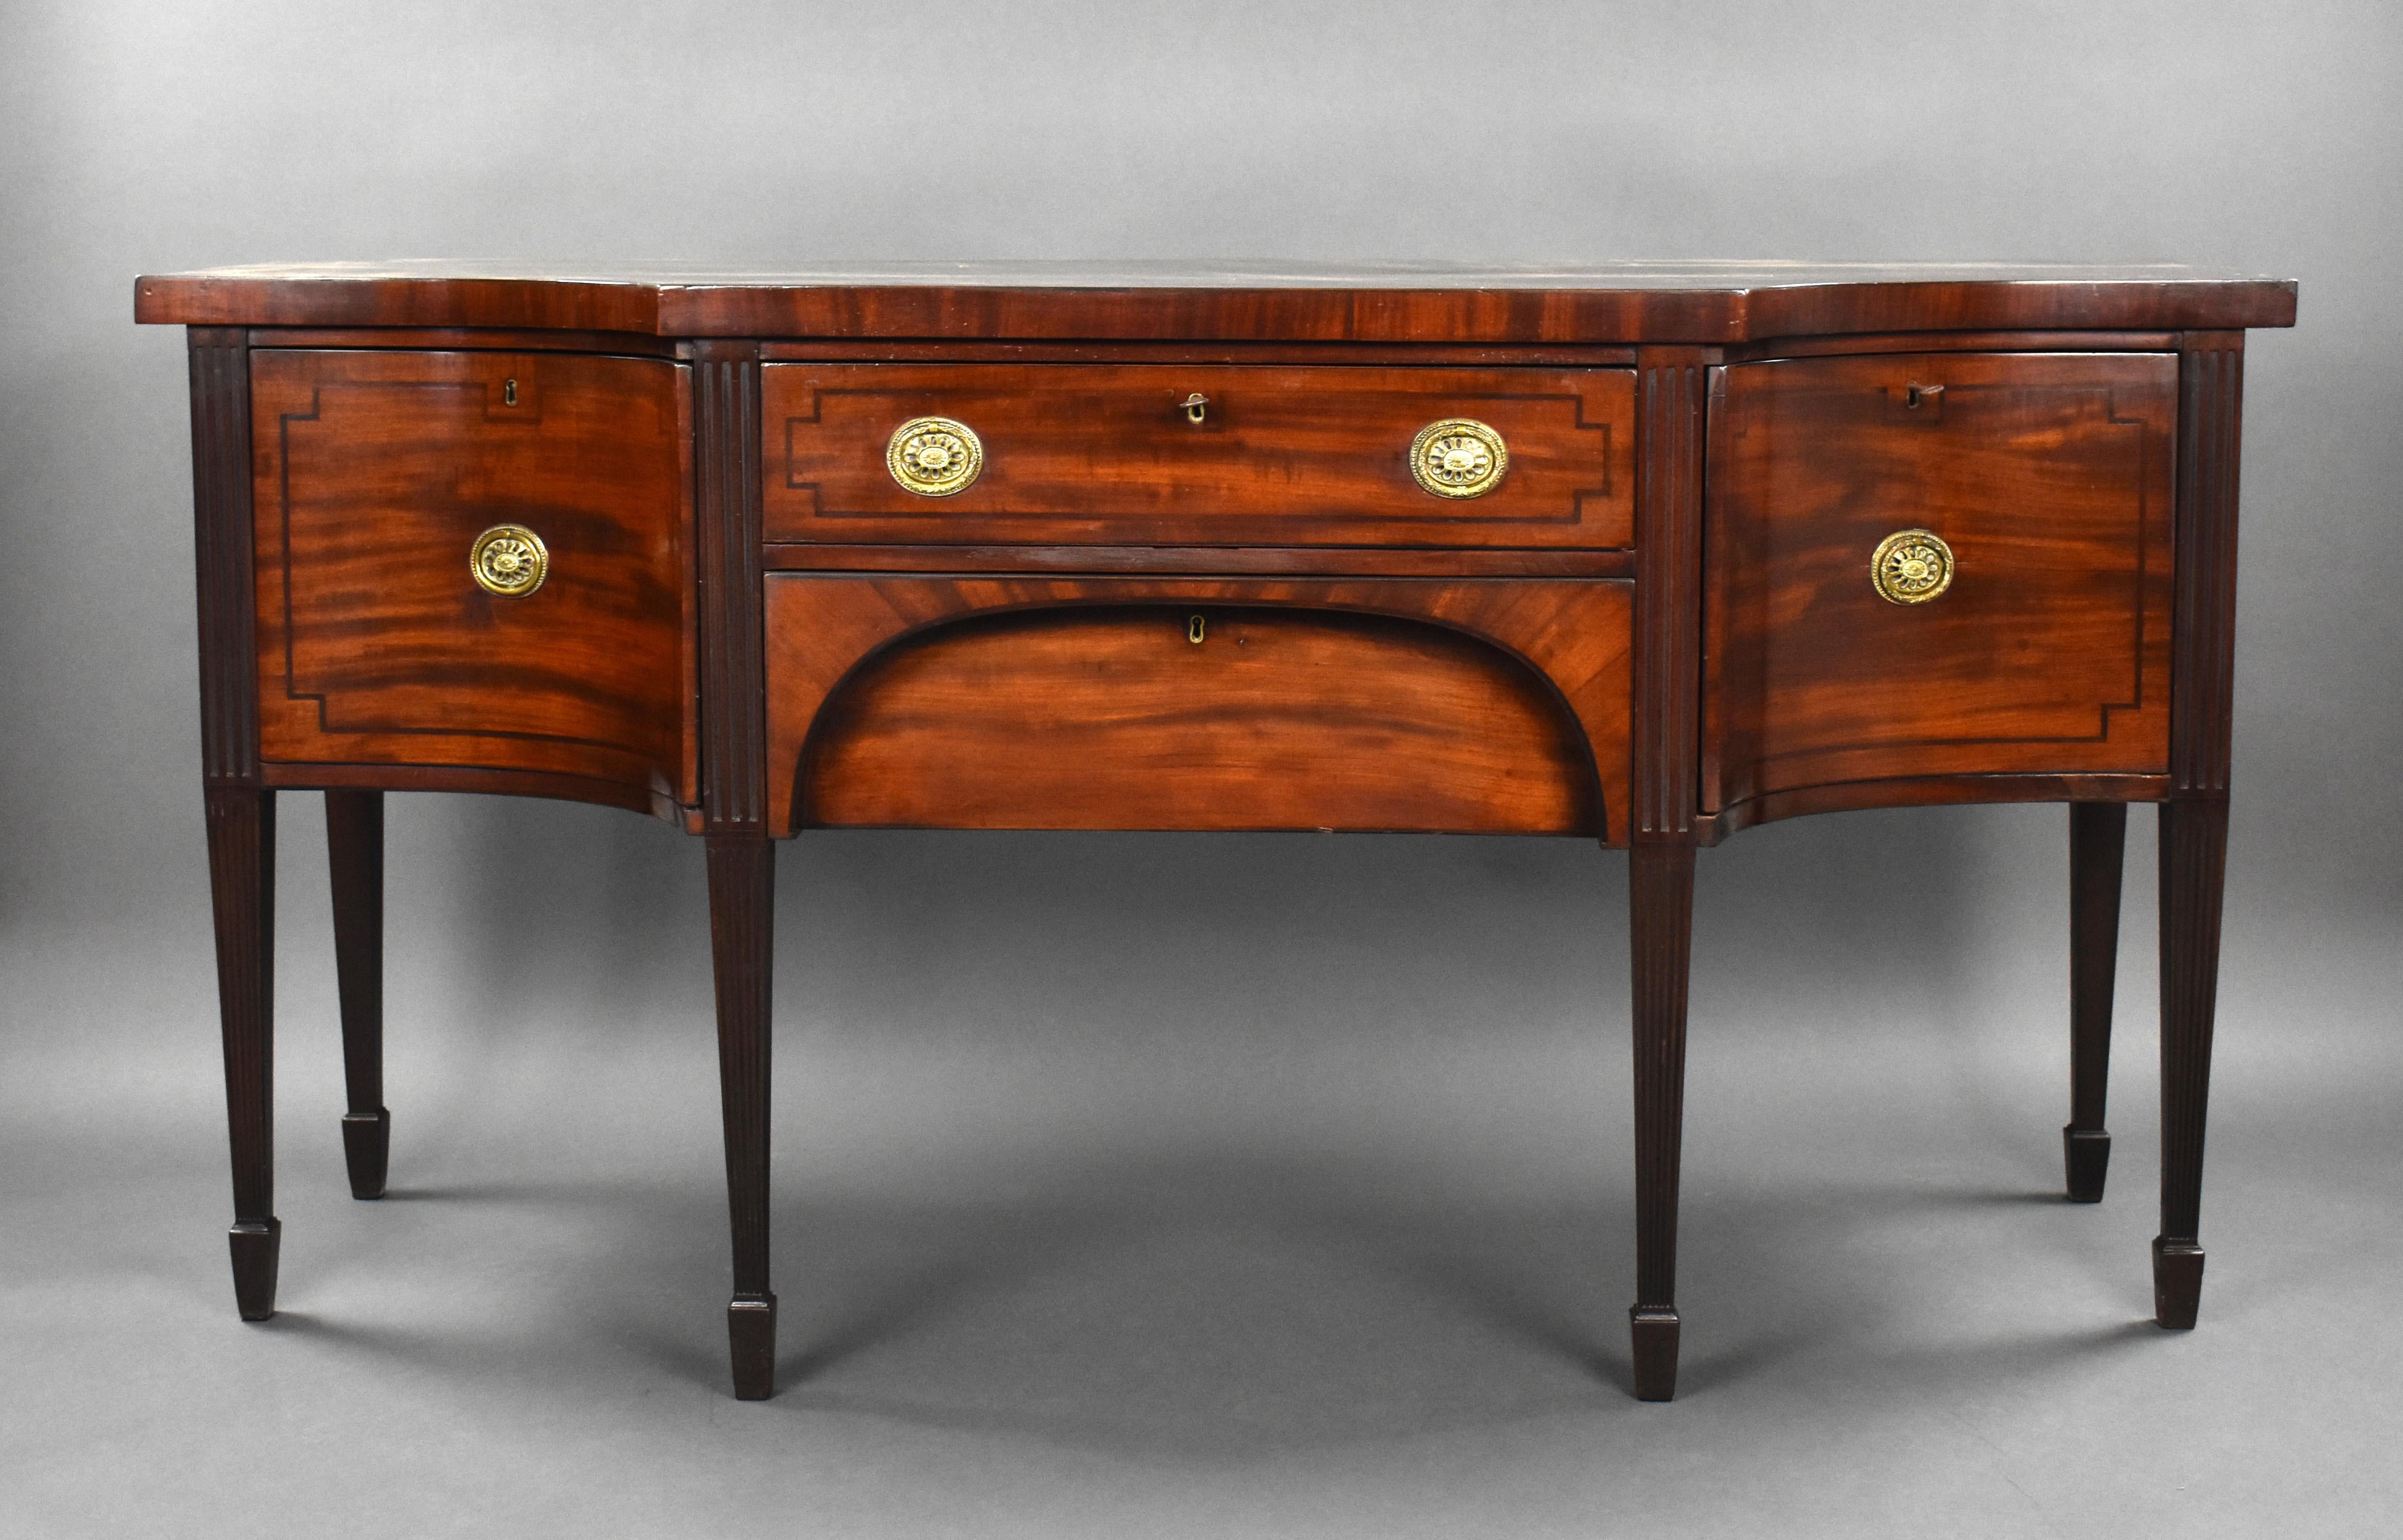 For sale is a good quality George III mahogany sideboard, having a central long drawer and frieze drawer below flanked by concave deep drawers, each inlaid with black line having brass ring handles standing on tapered legs terminating on spade feet.